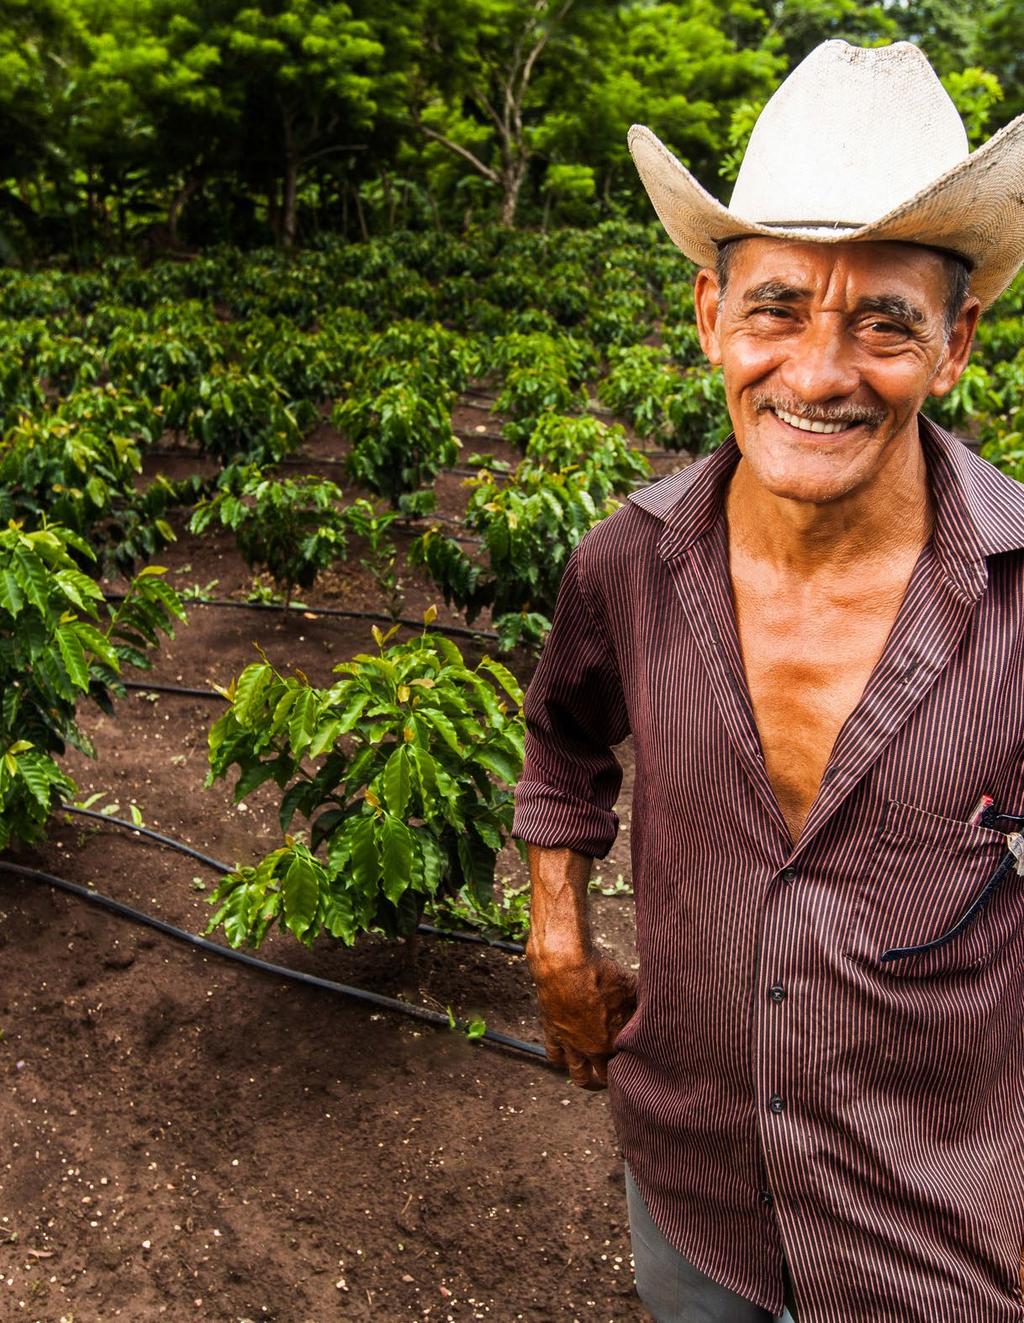 Working with the Private Sector The U.S. private sector is a crucial partner in supporting, generating and scaling food security innovations. The domestic coffee industry, responsible for nearly 1.